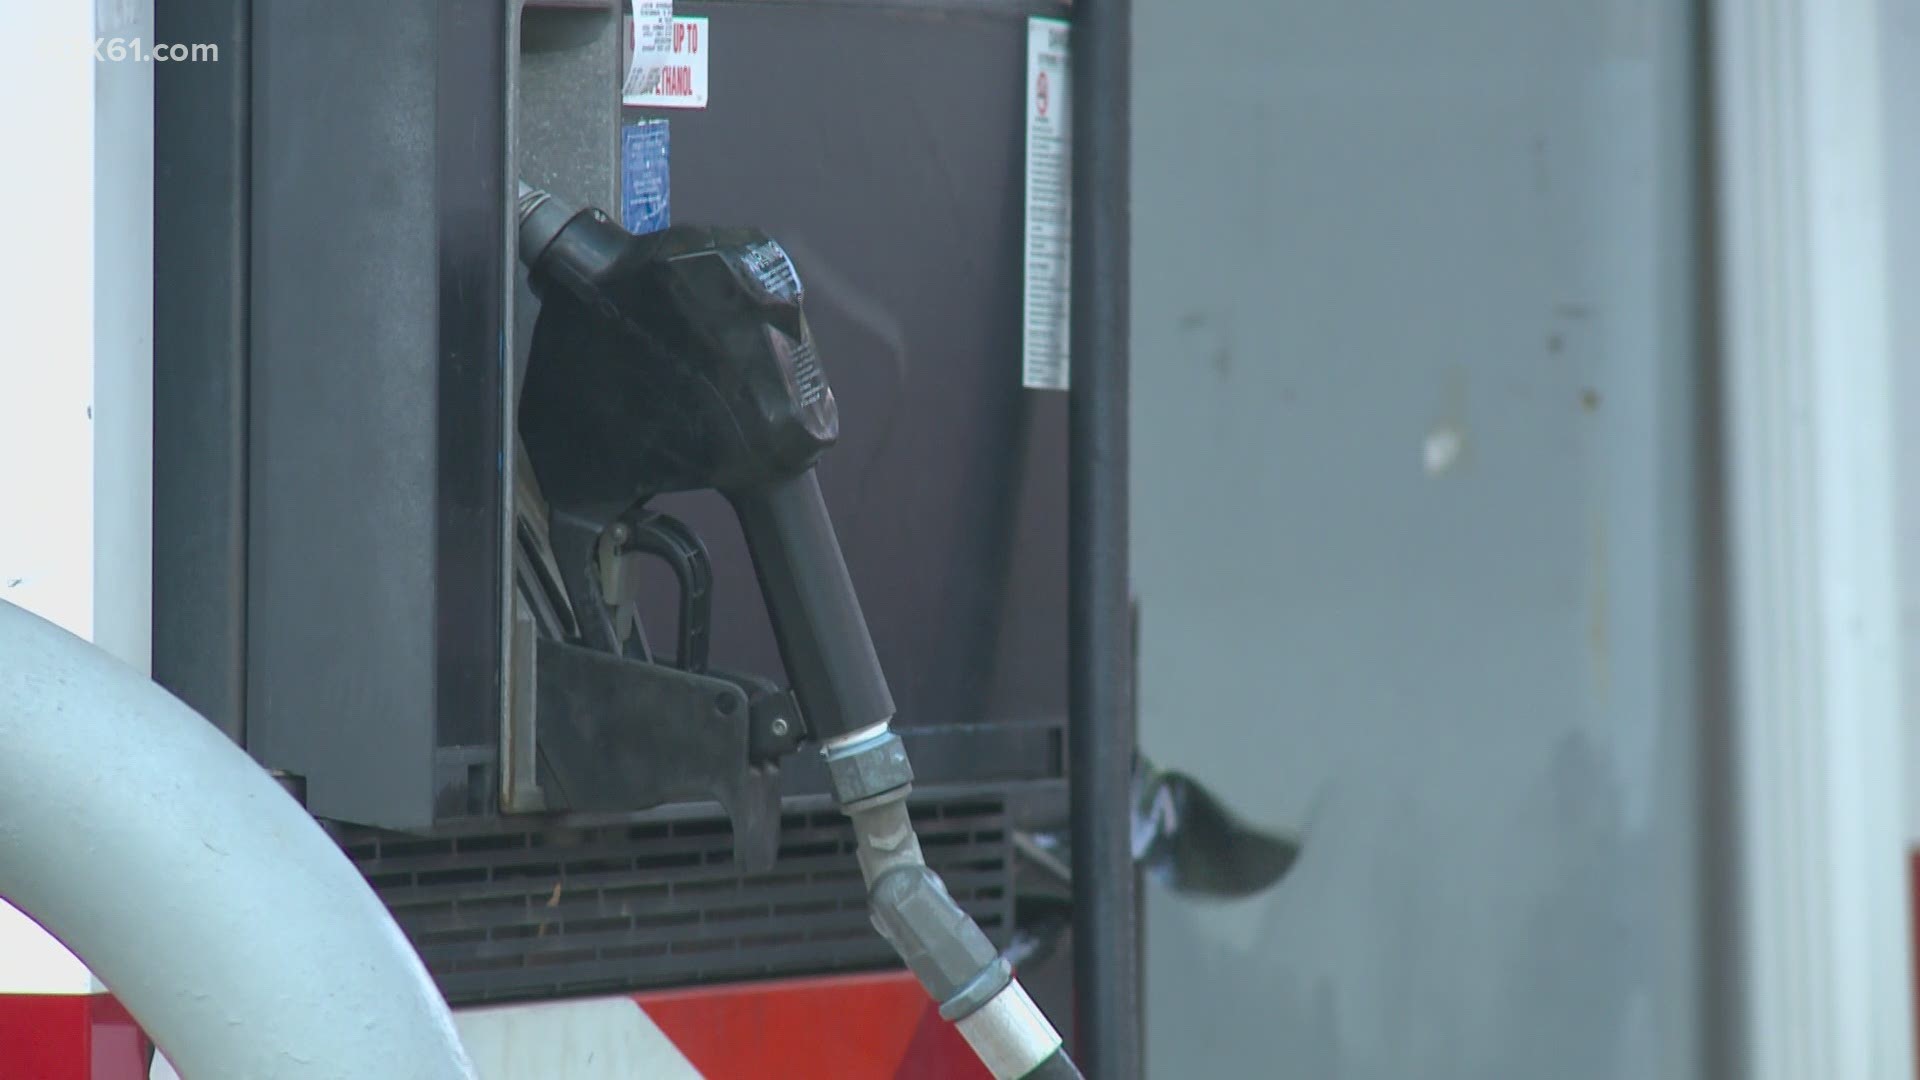 Police said they checked the machines after seeing complaints linked to the gas station after people reported having fraudulent charges on their cards.